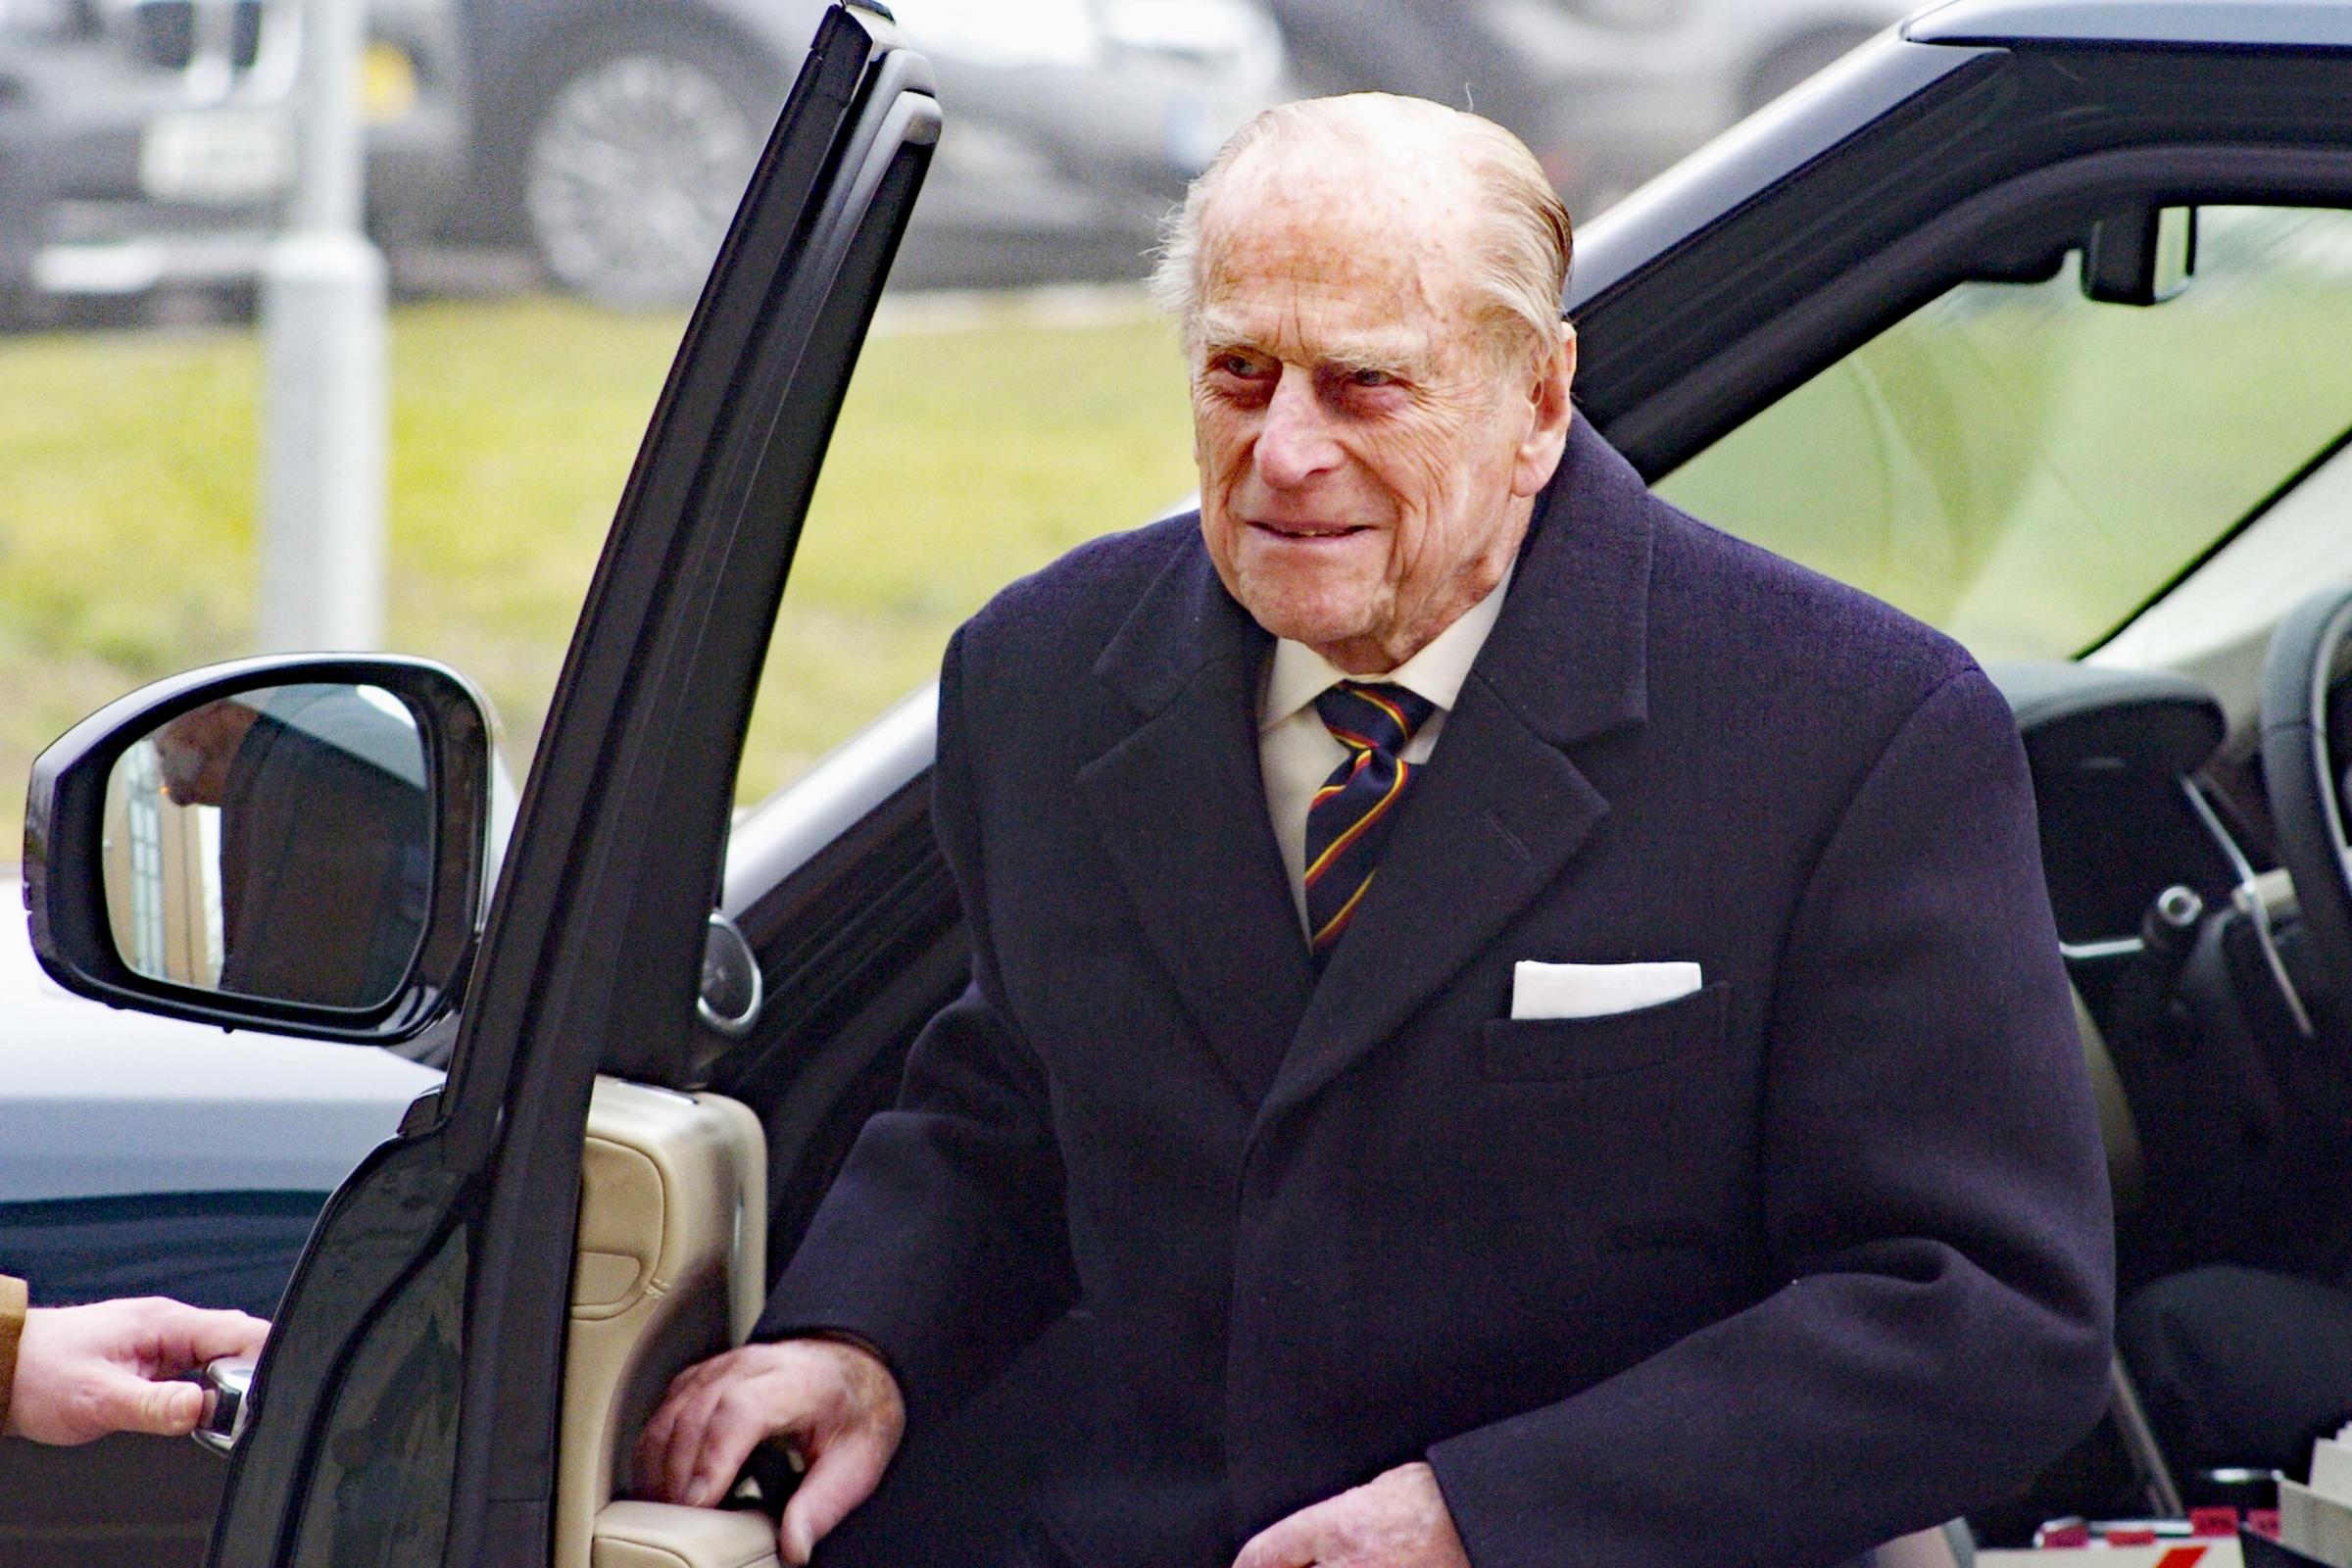 An 'internal error' led to Hampshire County Council wrongly announcing Prince Philip had died